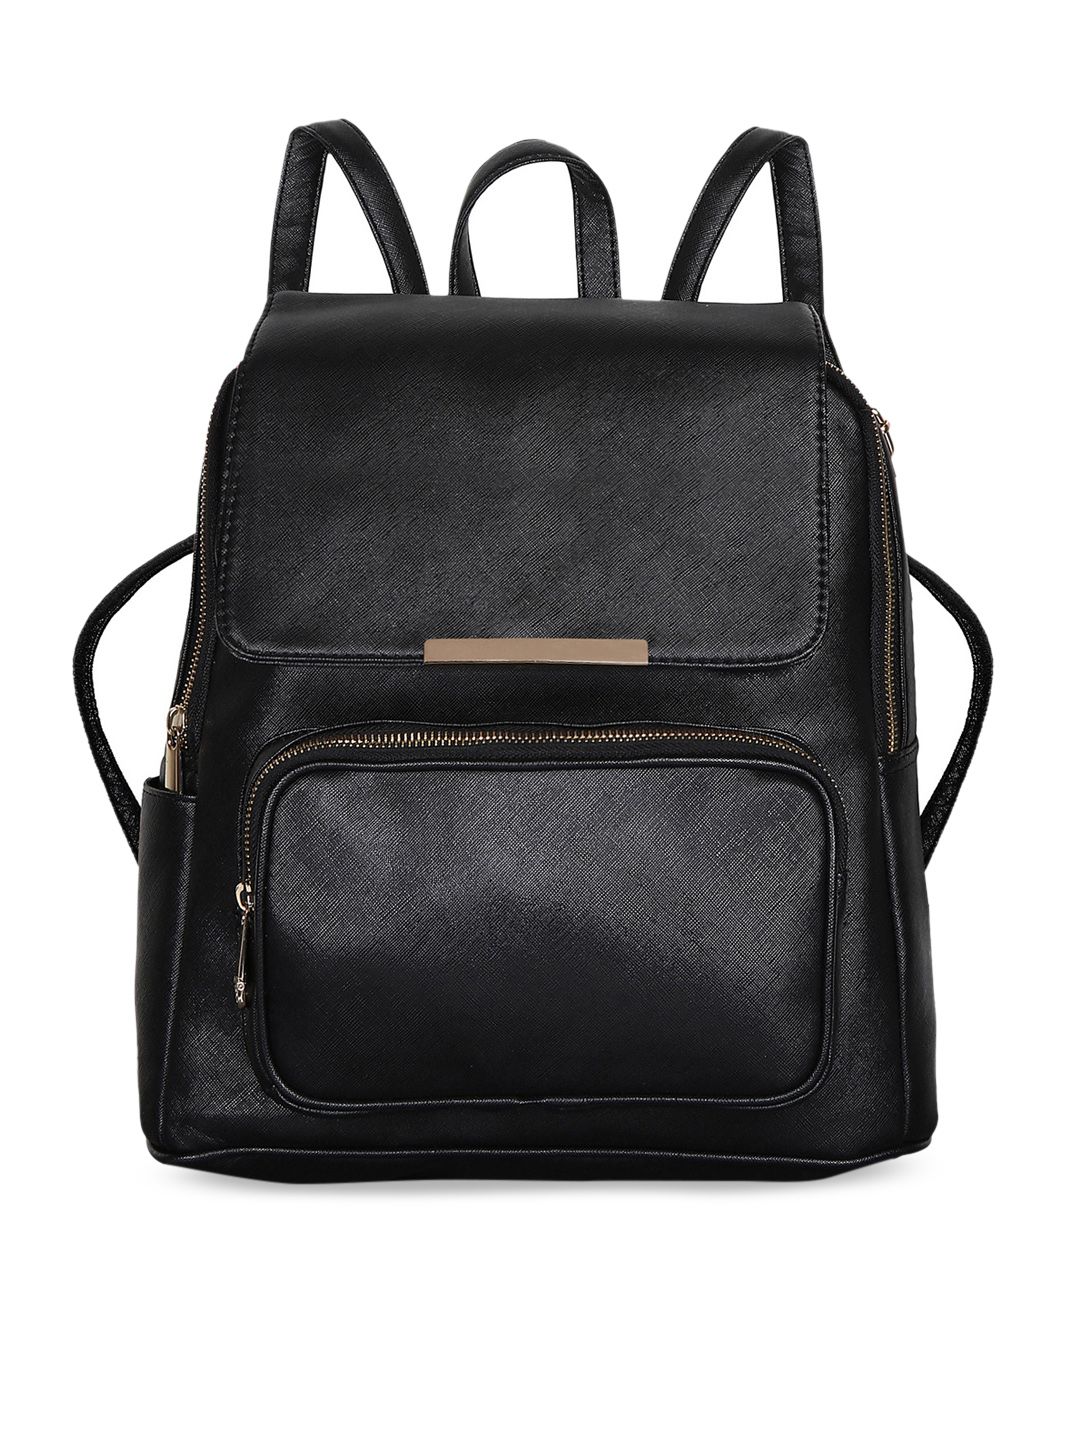 Lychee bags Women Black Solid Backpack Price in India